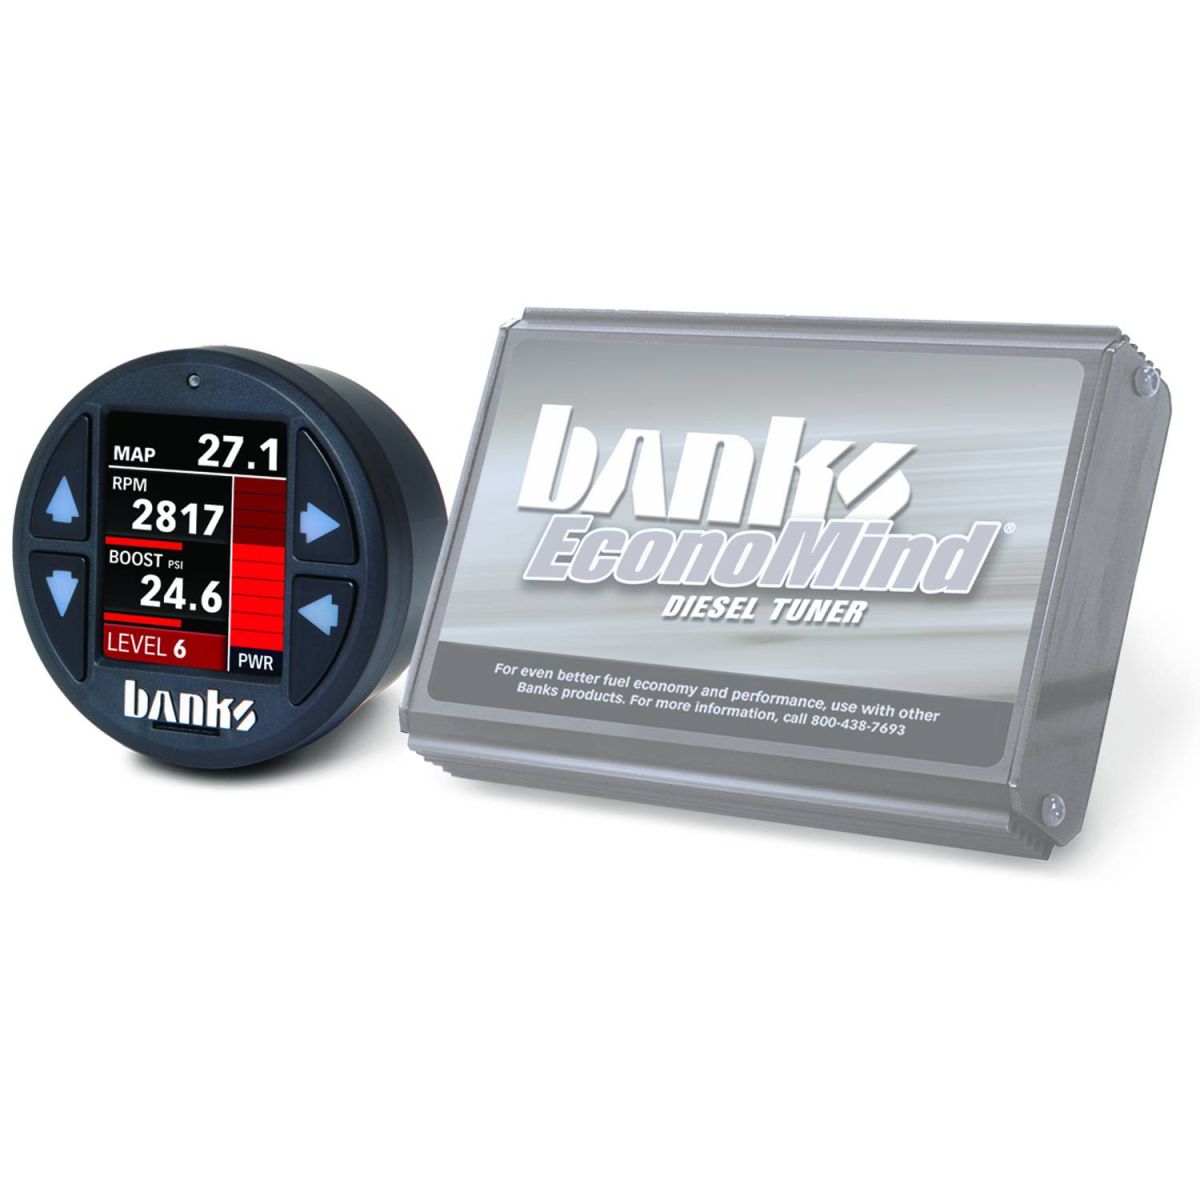 Banks Power - Banks Power Economind Diesel Tuner (PowerPack calibration) with Banks iDash 1.8 Super Gauge for use with 2001-2004 Chevy 6.6L, LB7